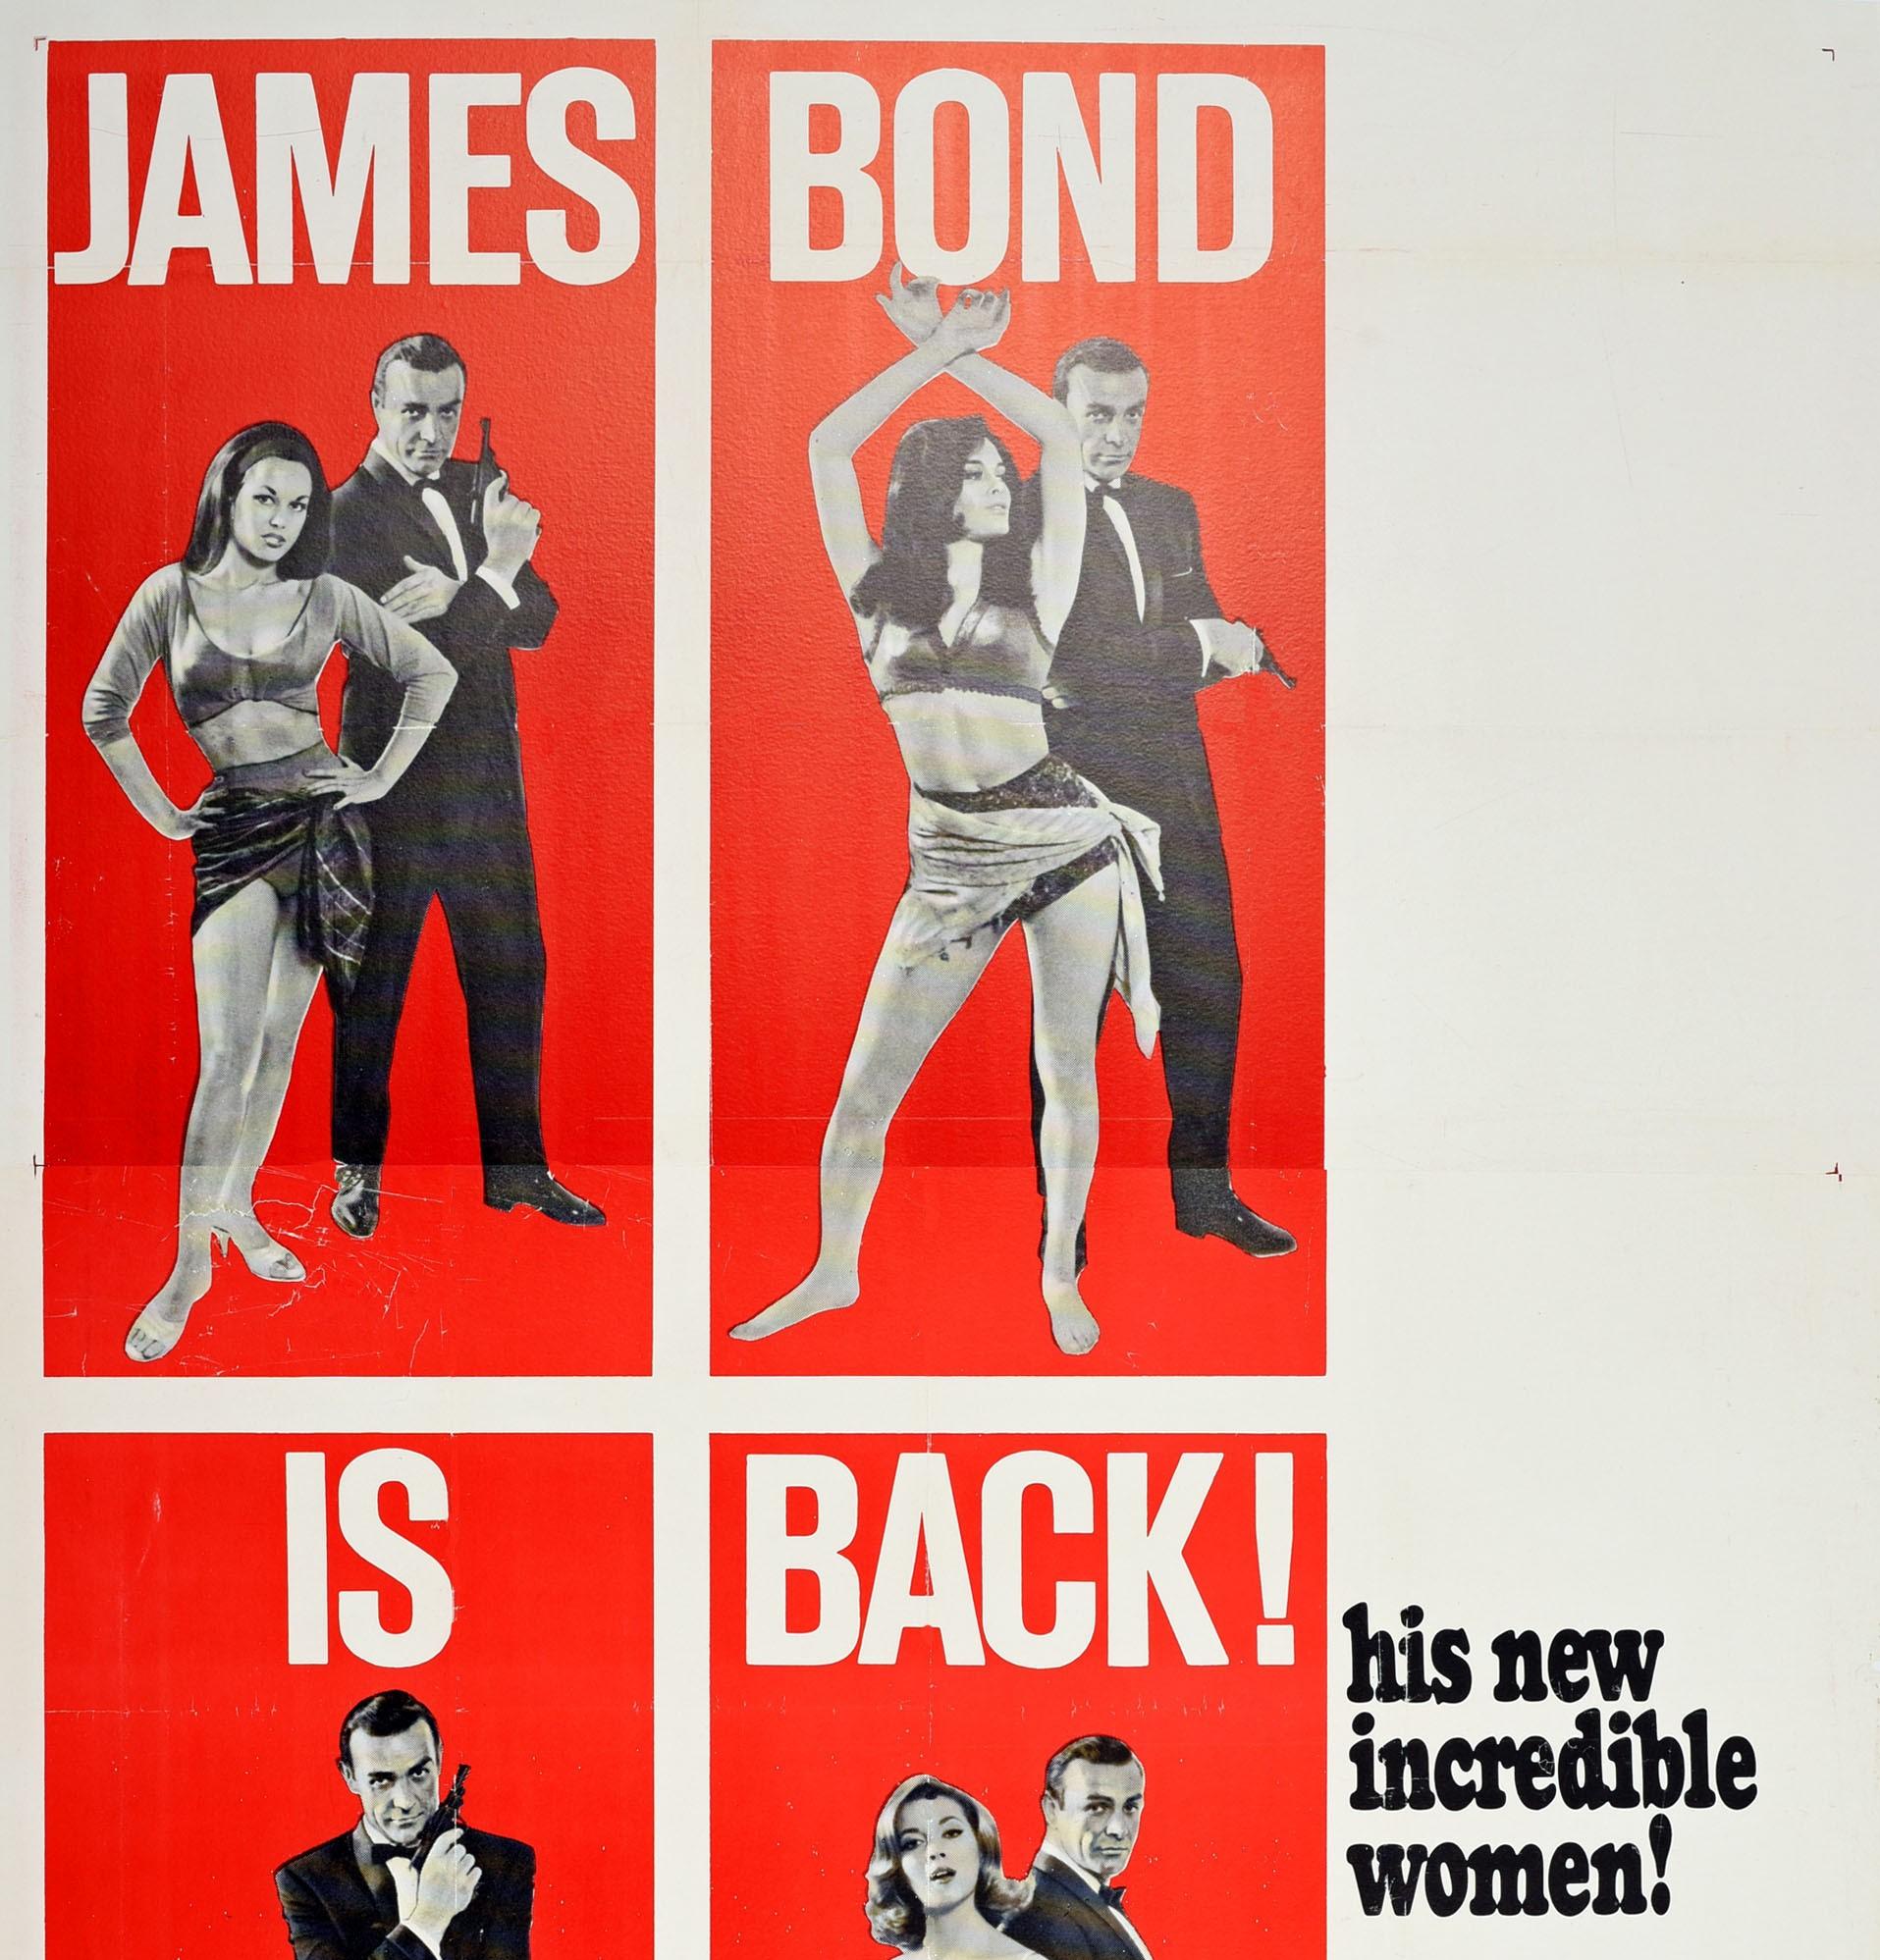 Original vintage three-sheet movie poster for the 007 James Bond spy film From Russia With Love directed by Terence Young and starring Sean Connery, Robert Shaw, Pedro Armendariz, Lotte Lenya and Bernard Lee. Great design depicting four images of